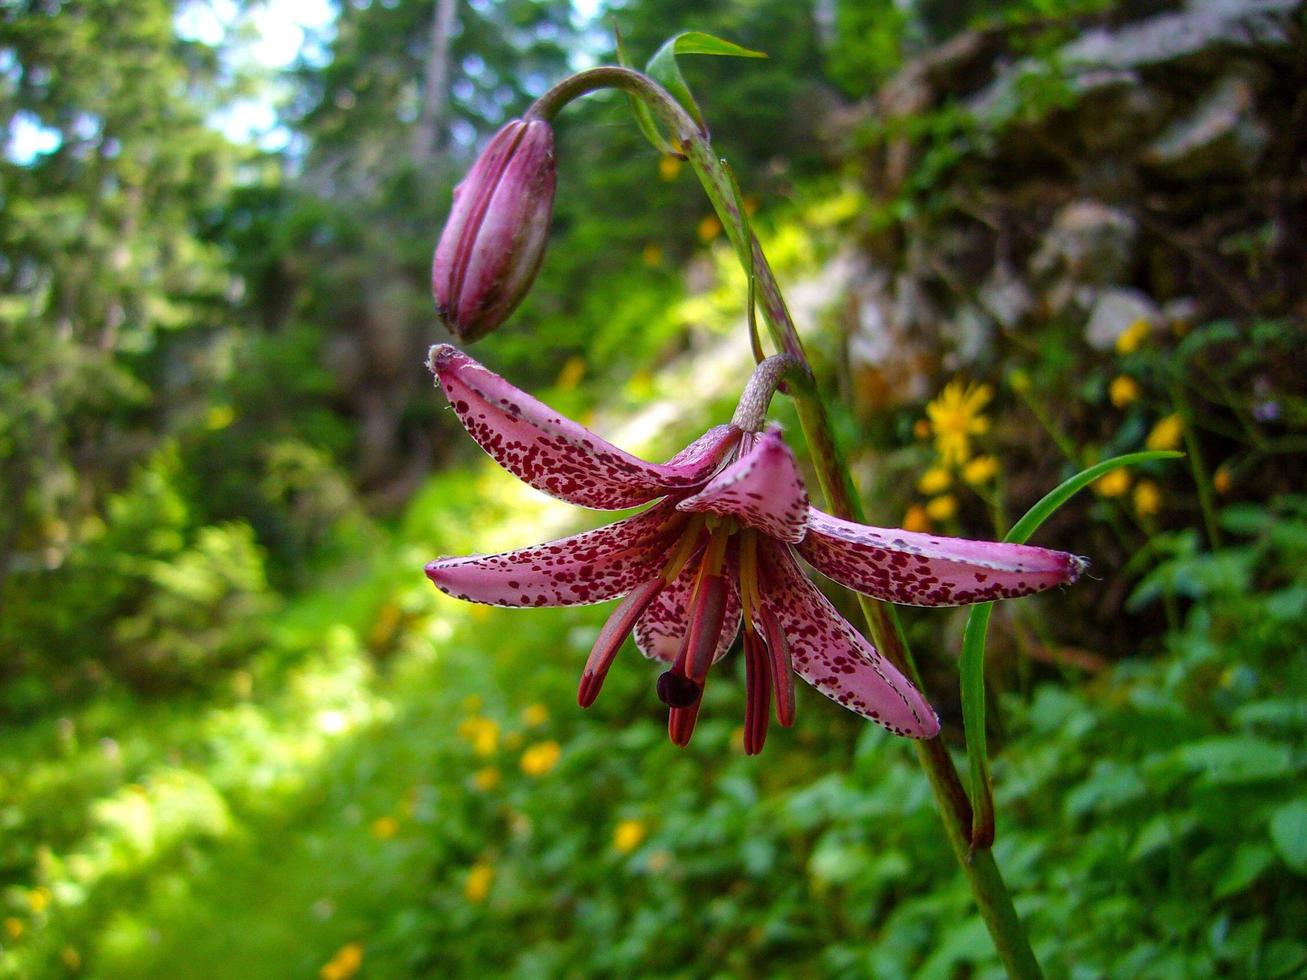 Lilium martagon, the martagon lily or Turk's cap lily, in the bavarian alps photo